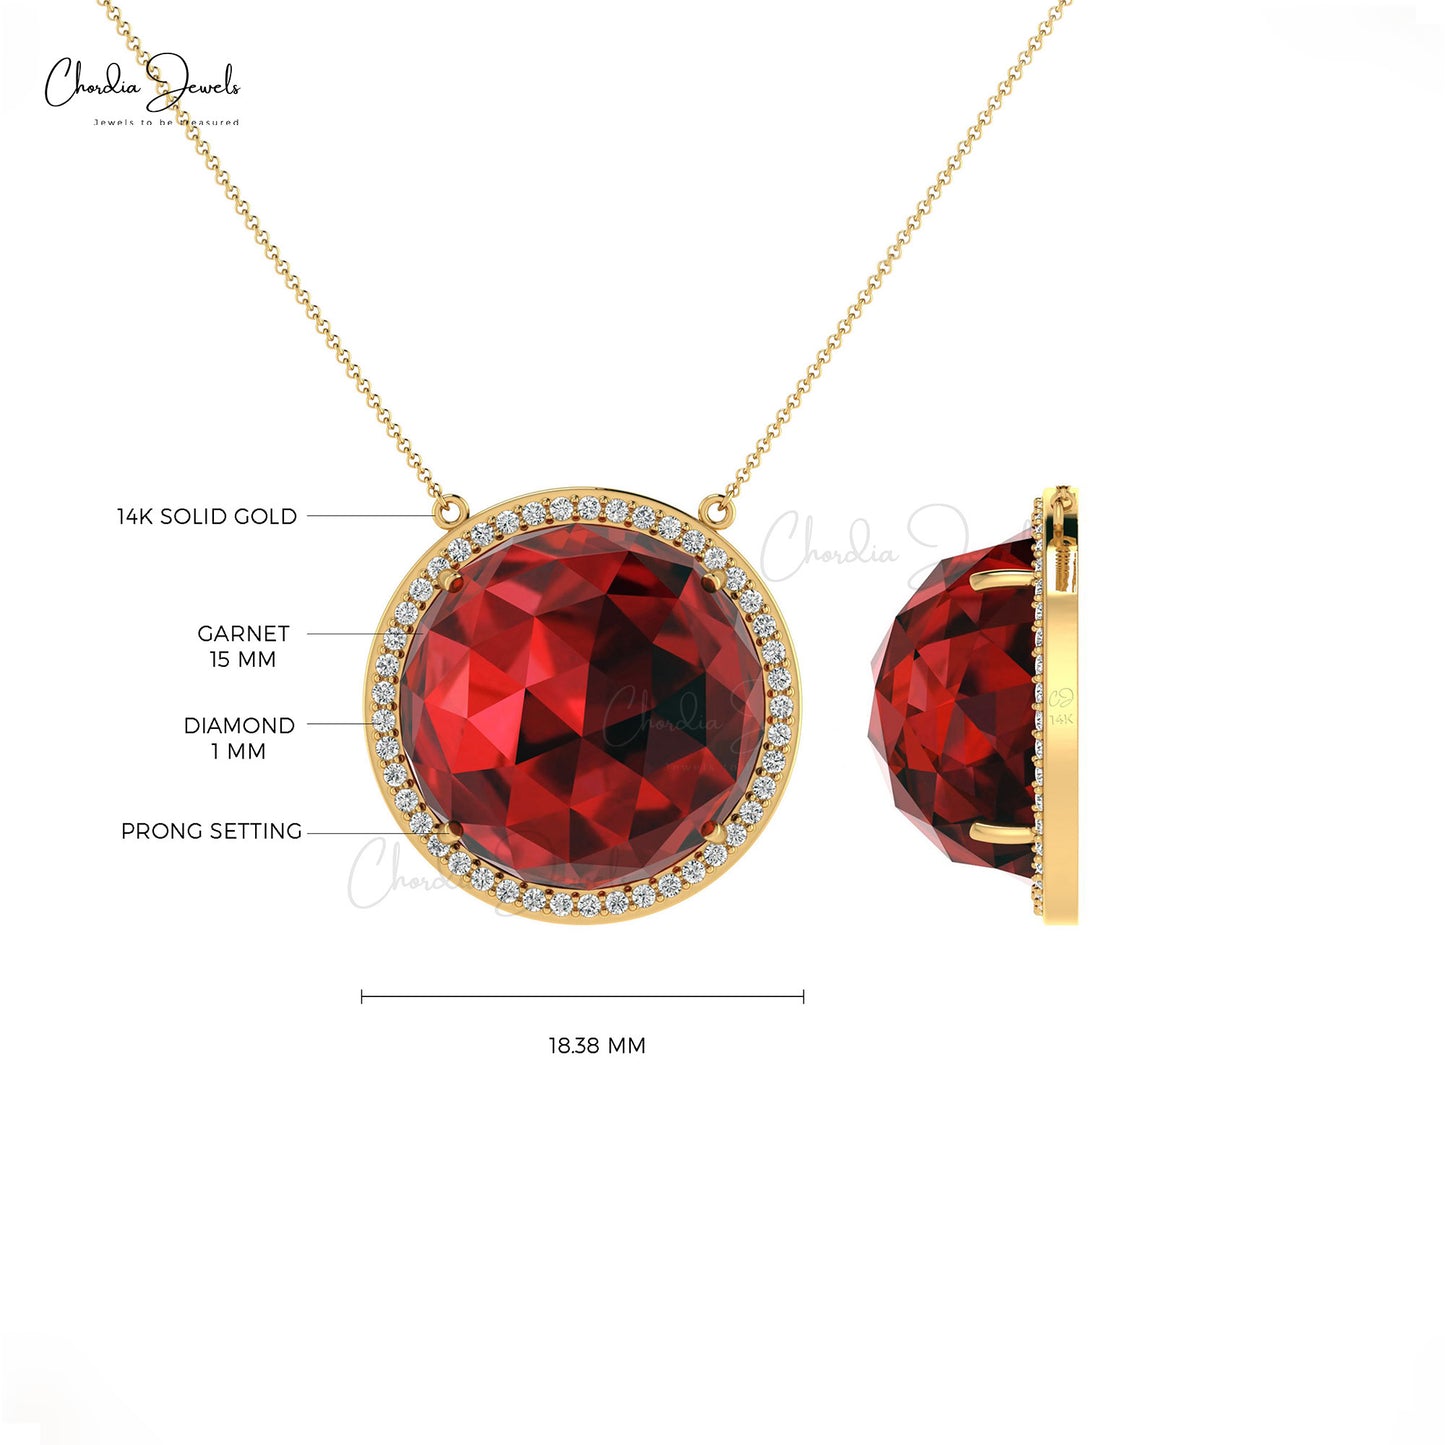 Natural Garnet Necklace in 14k Solid Gold Diamond Necklace